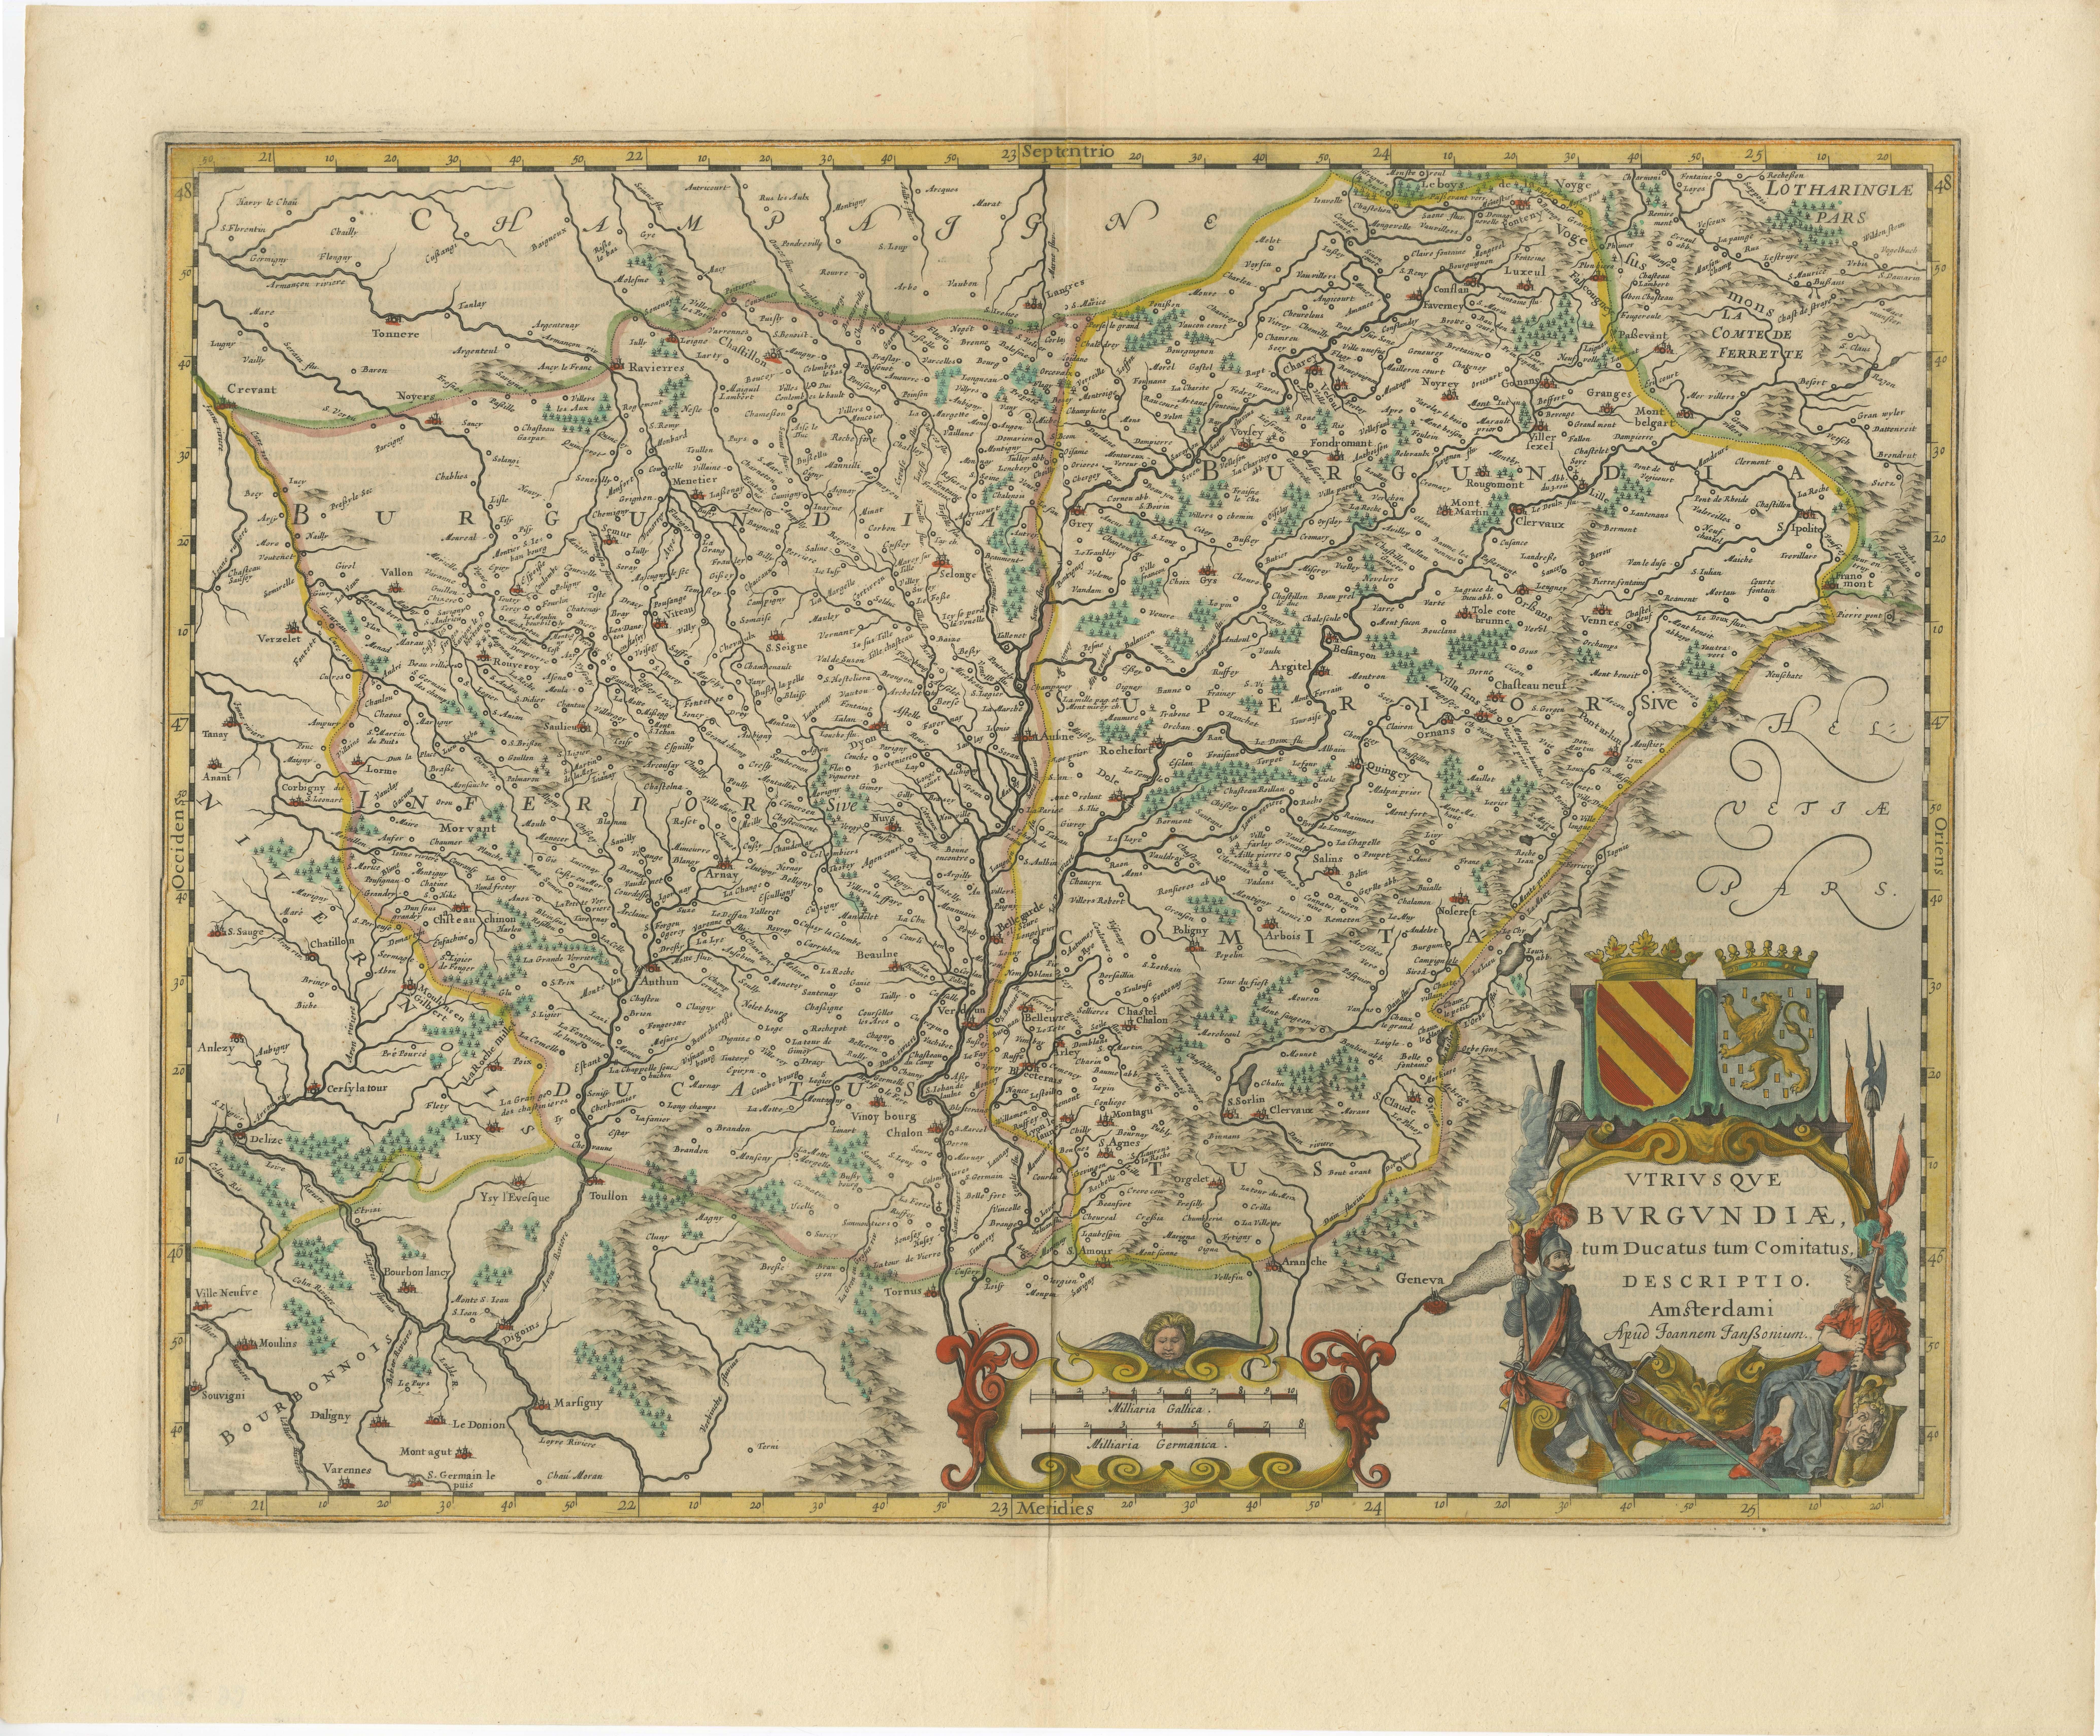 This authentic handcolored map  is a detailed 17th-century depiction of the Burgundy region, divided into the Duchy of Burgundy (